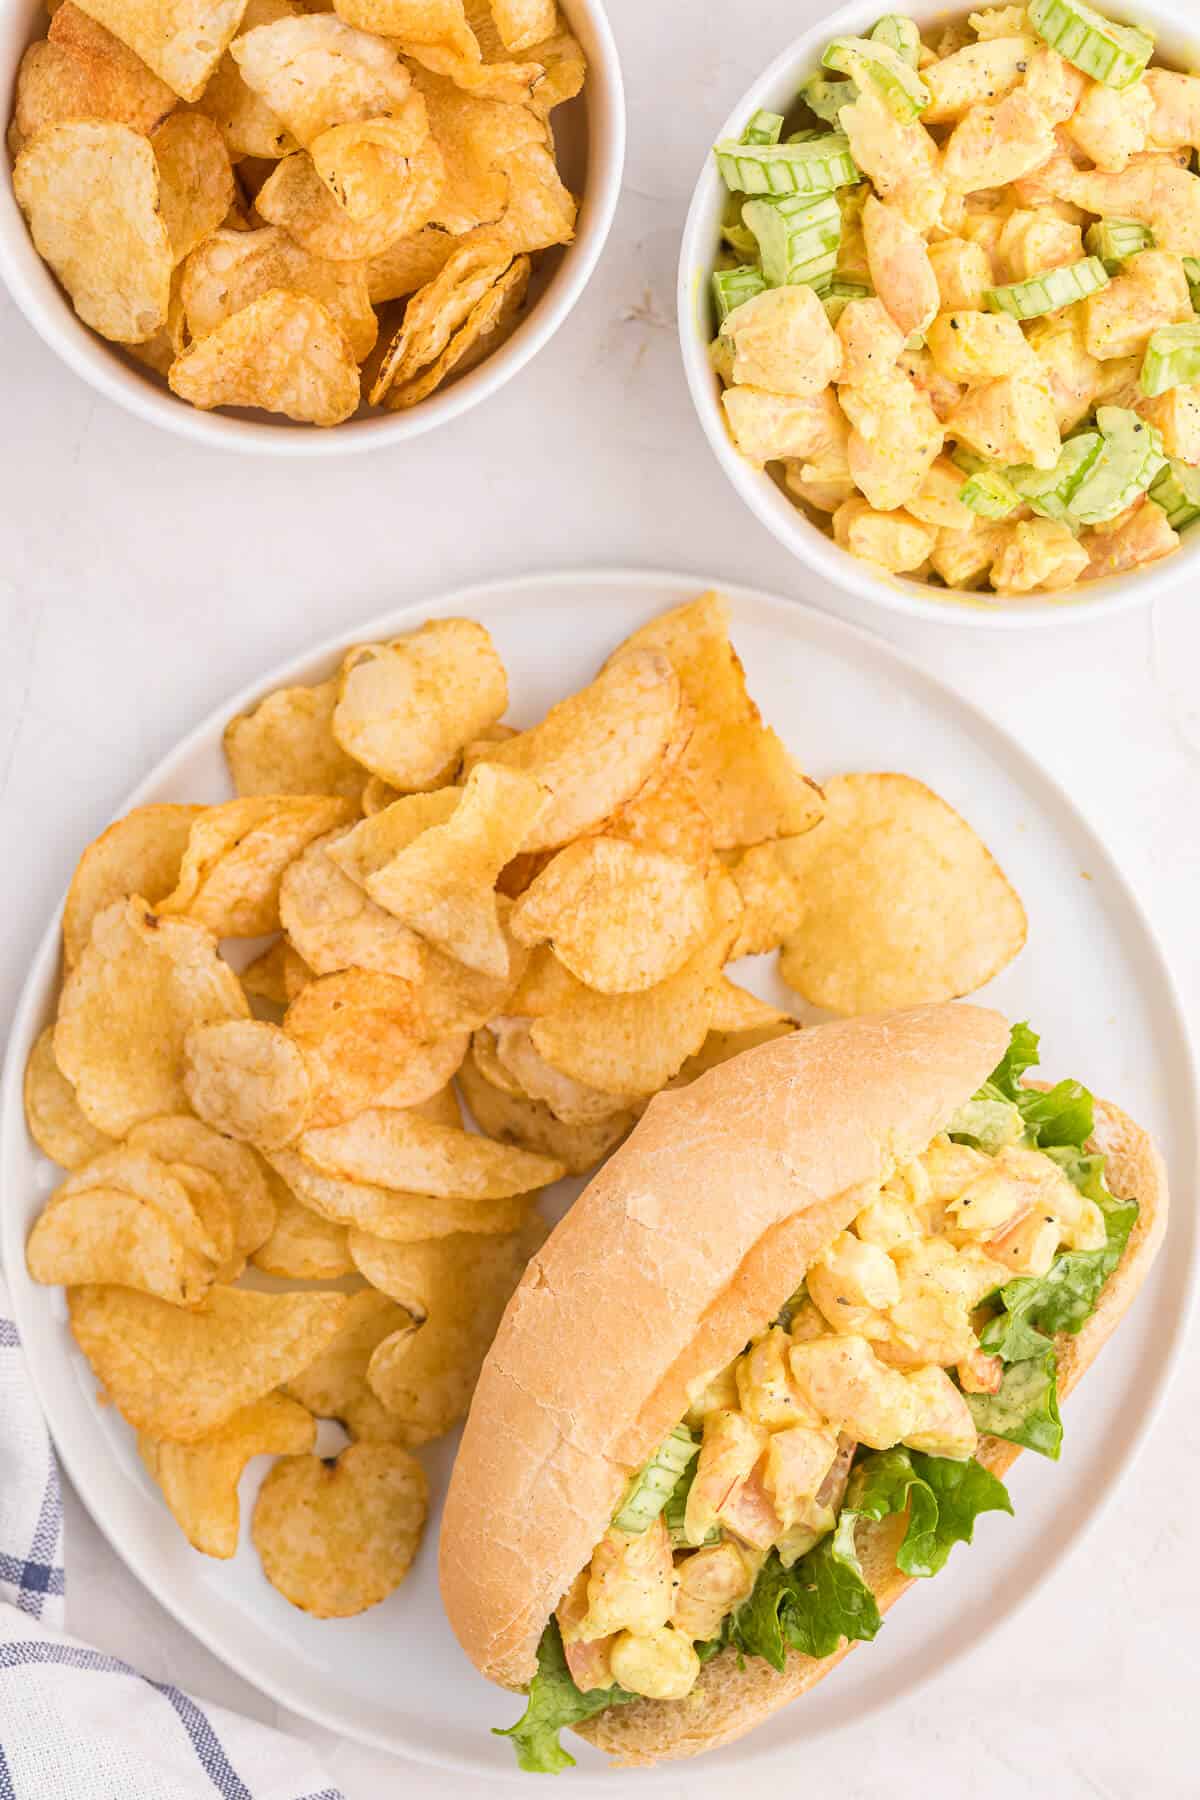 Curried shrimp rolls with potato chips on a plate.